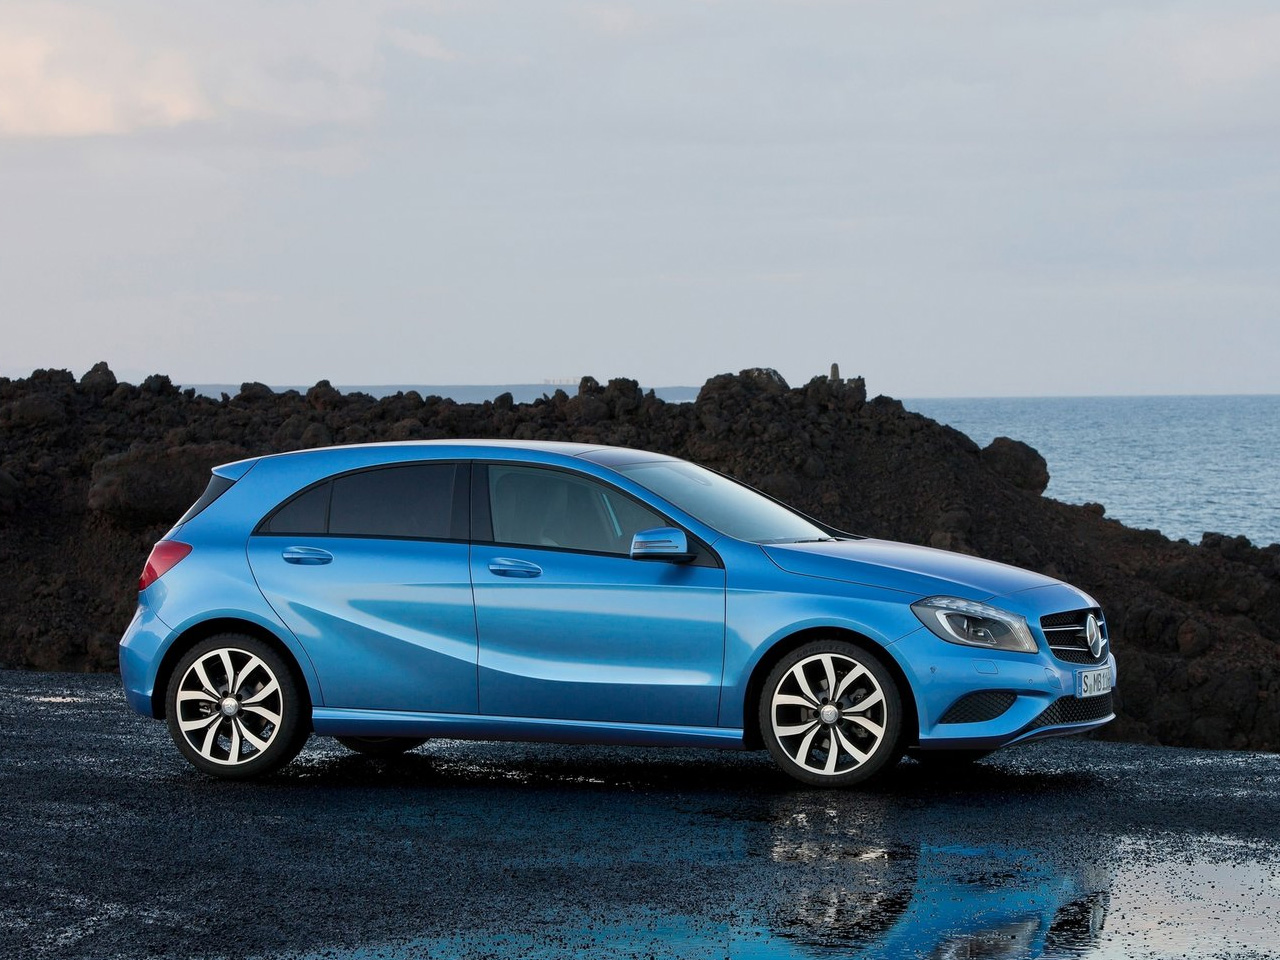 A balanced design gives the Mercedes Benz A-Class a new edge to a great drive.